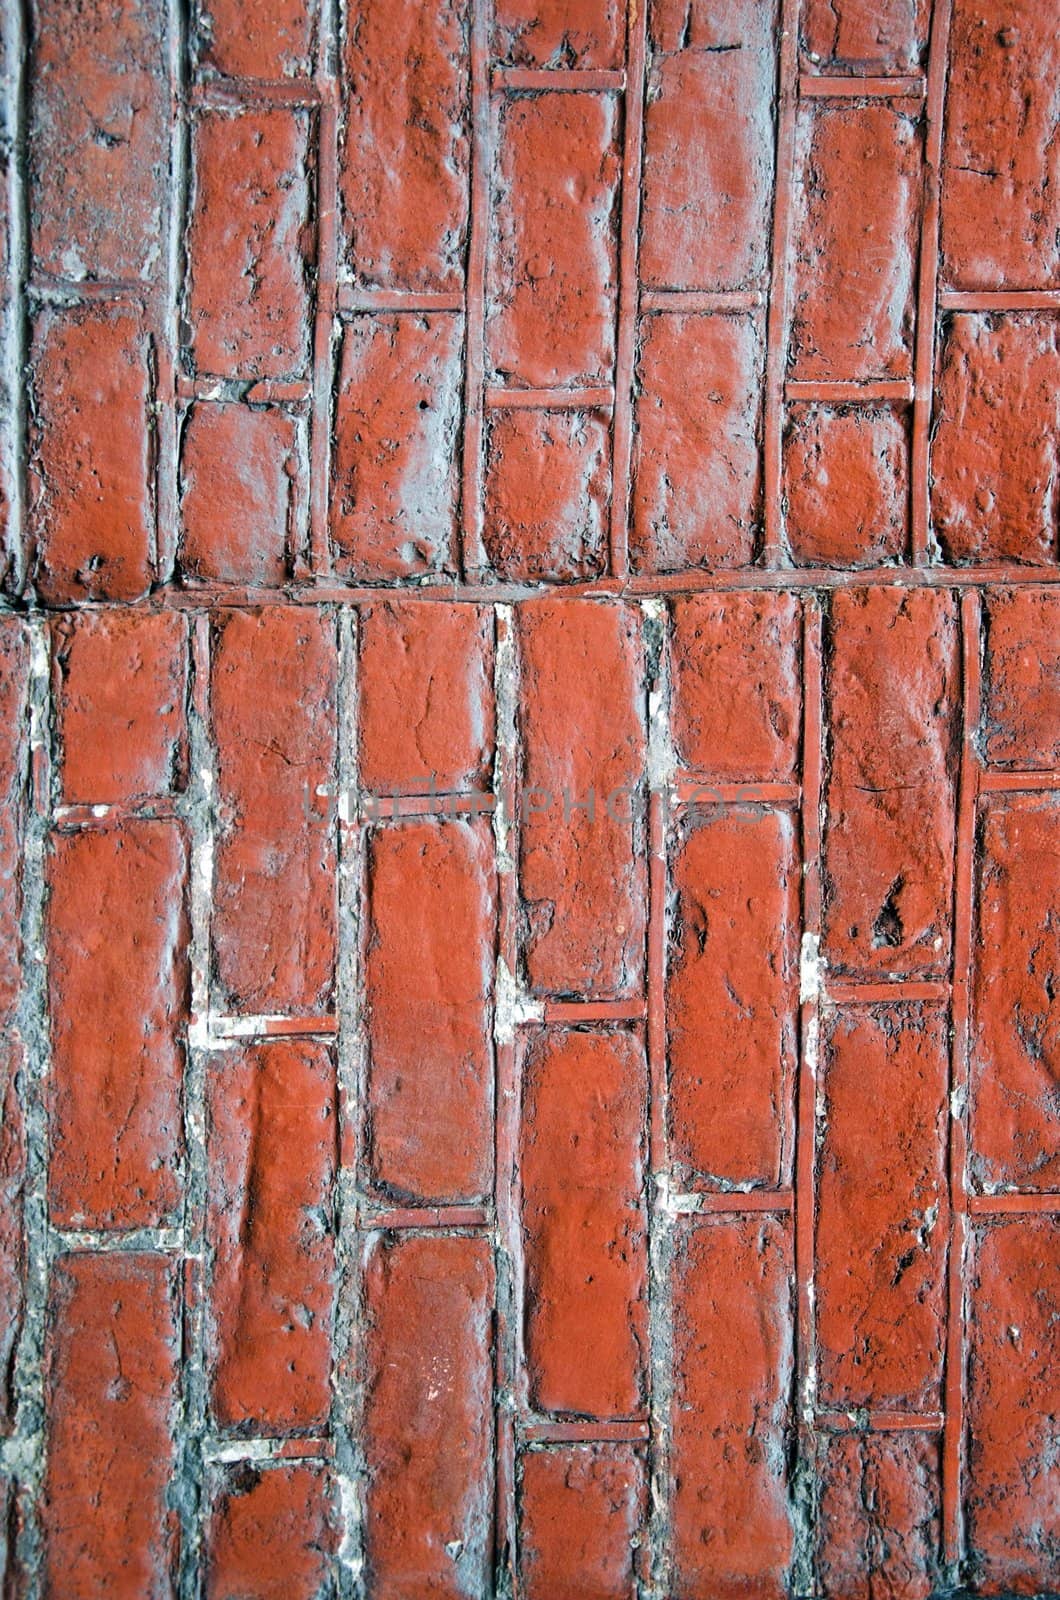 Painted brick wall details architectural fragment by sauletas